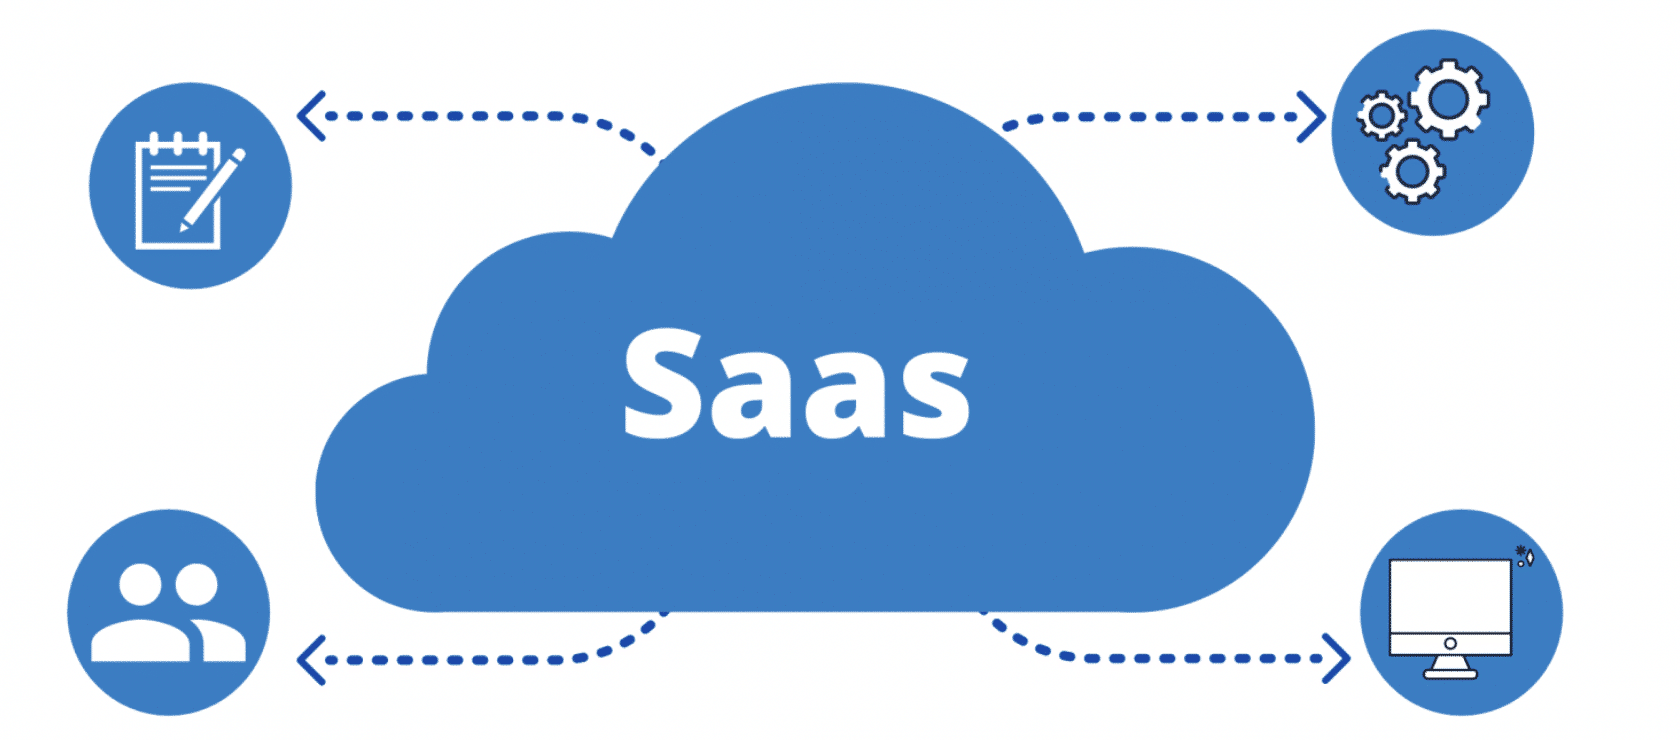 graphic shows that SaaS can be customized and integrated to fit a business’s needs